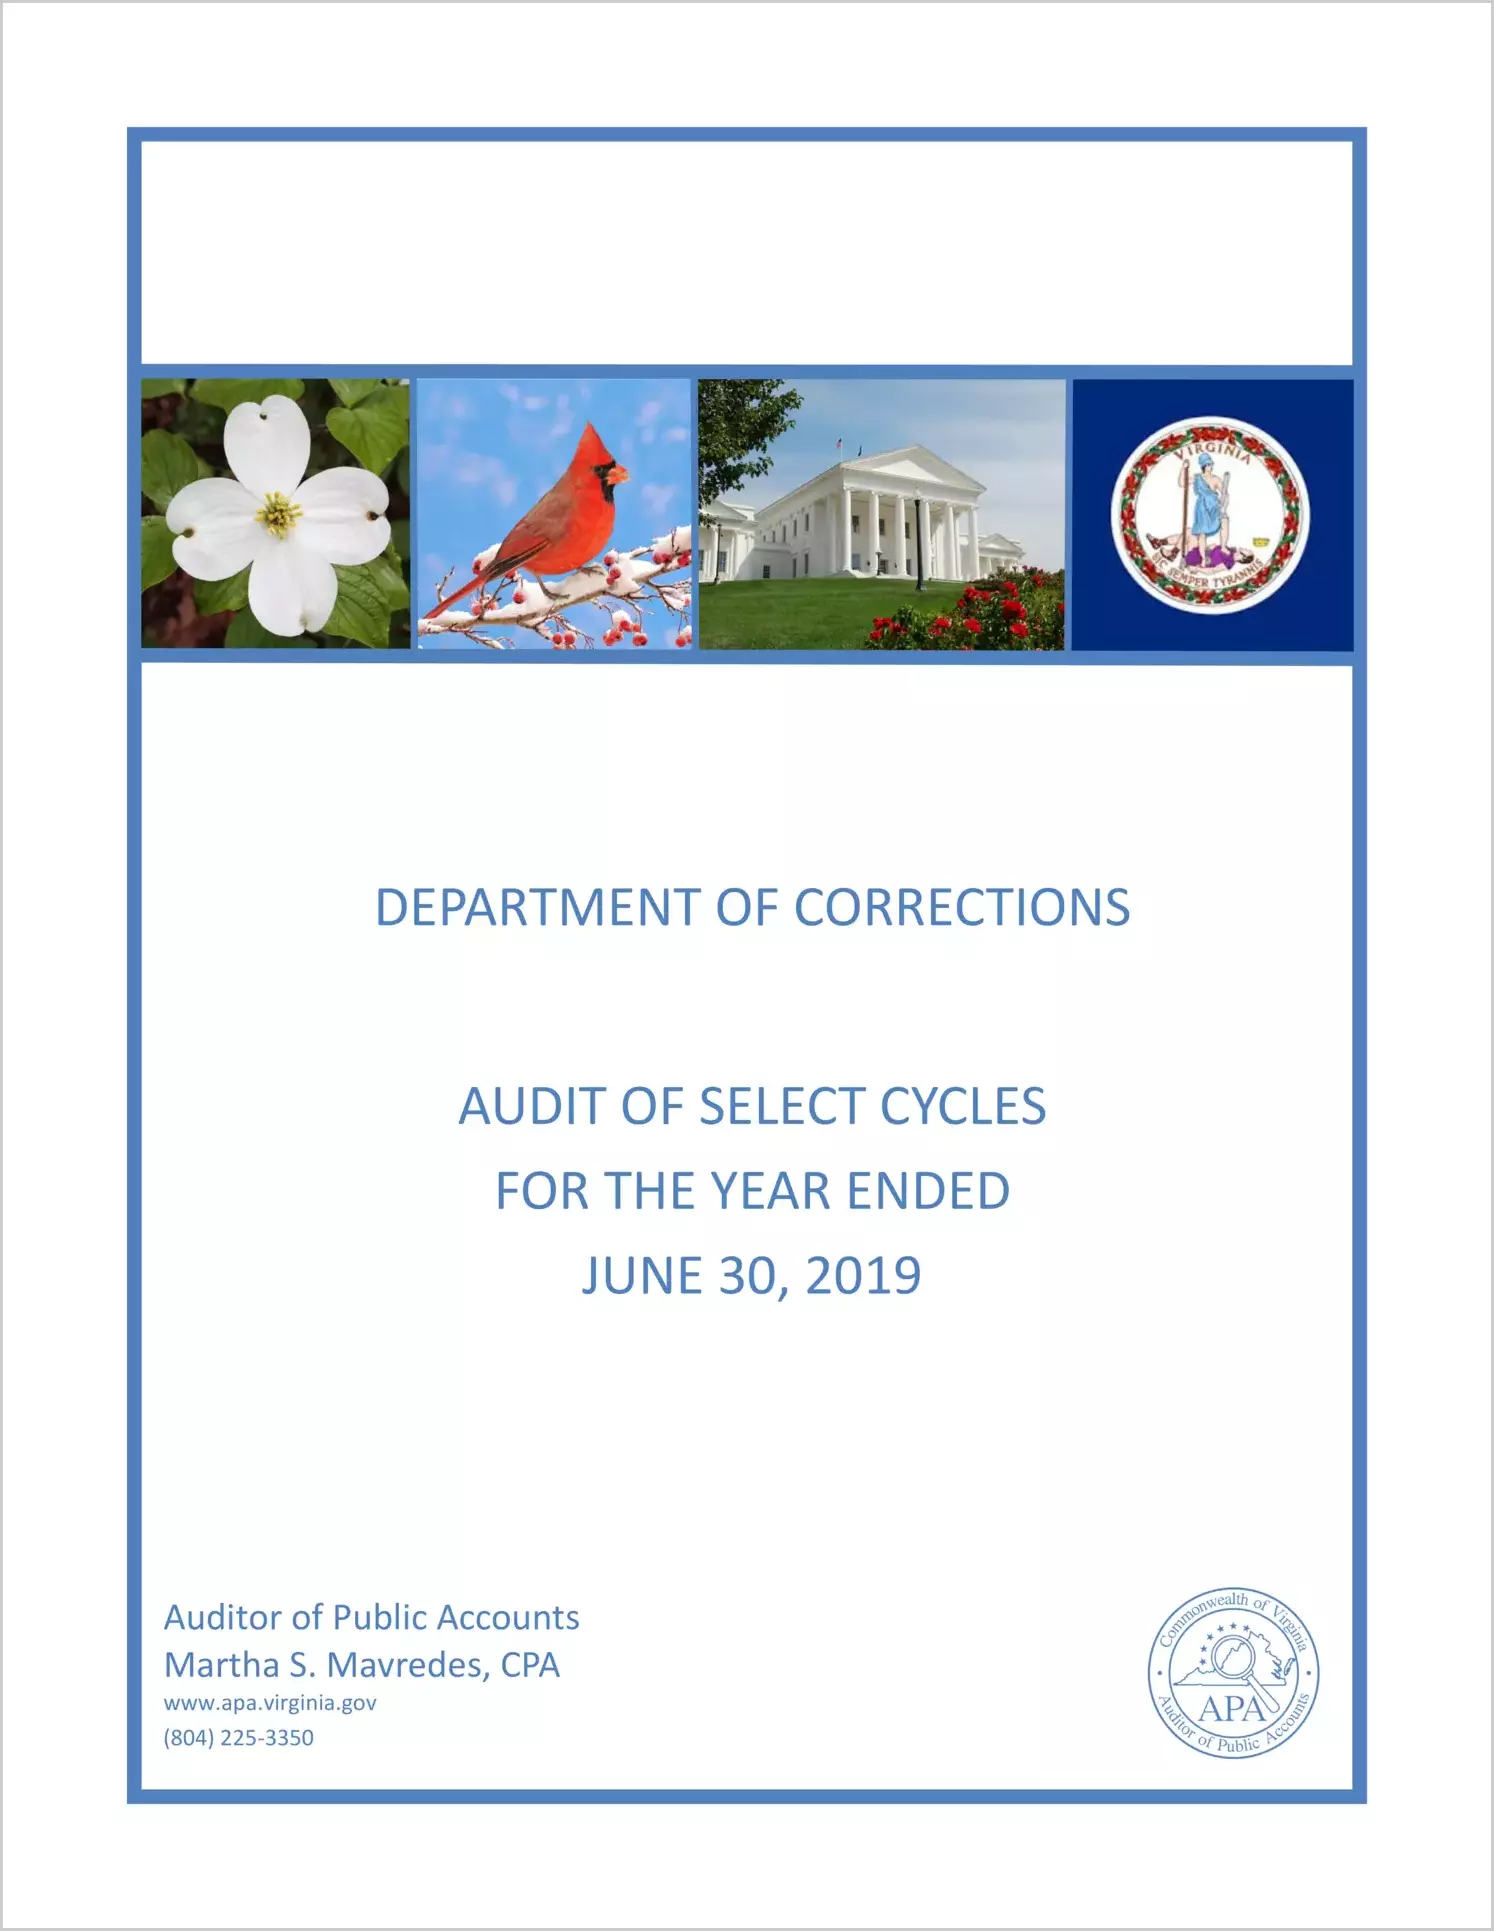 Department of Corrections Audit of Select Cycles for the year ended June 30, 2019